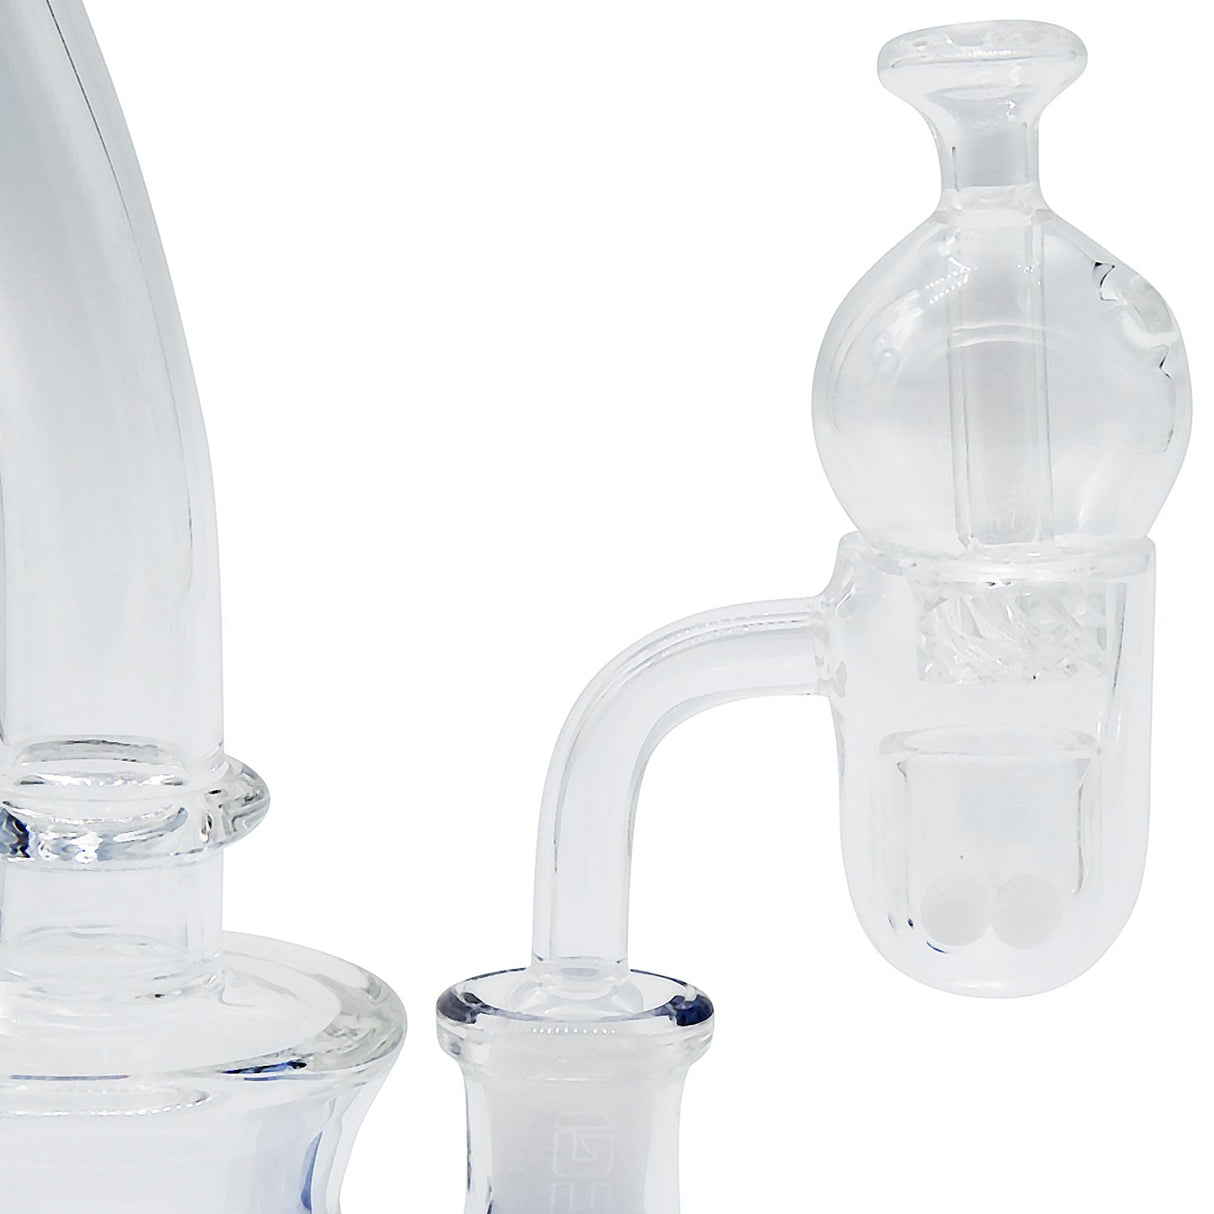 Glasshouse 25mm Quartz Banger Kit with Rounded Base and Concave Flattop on White Background